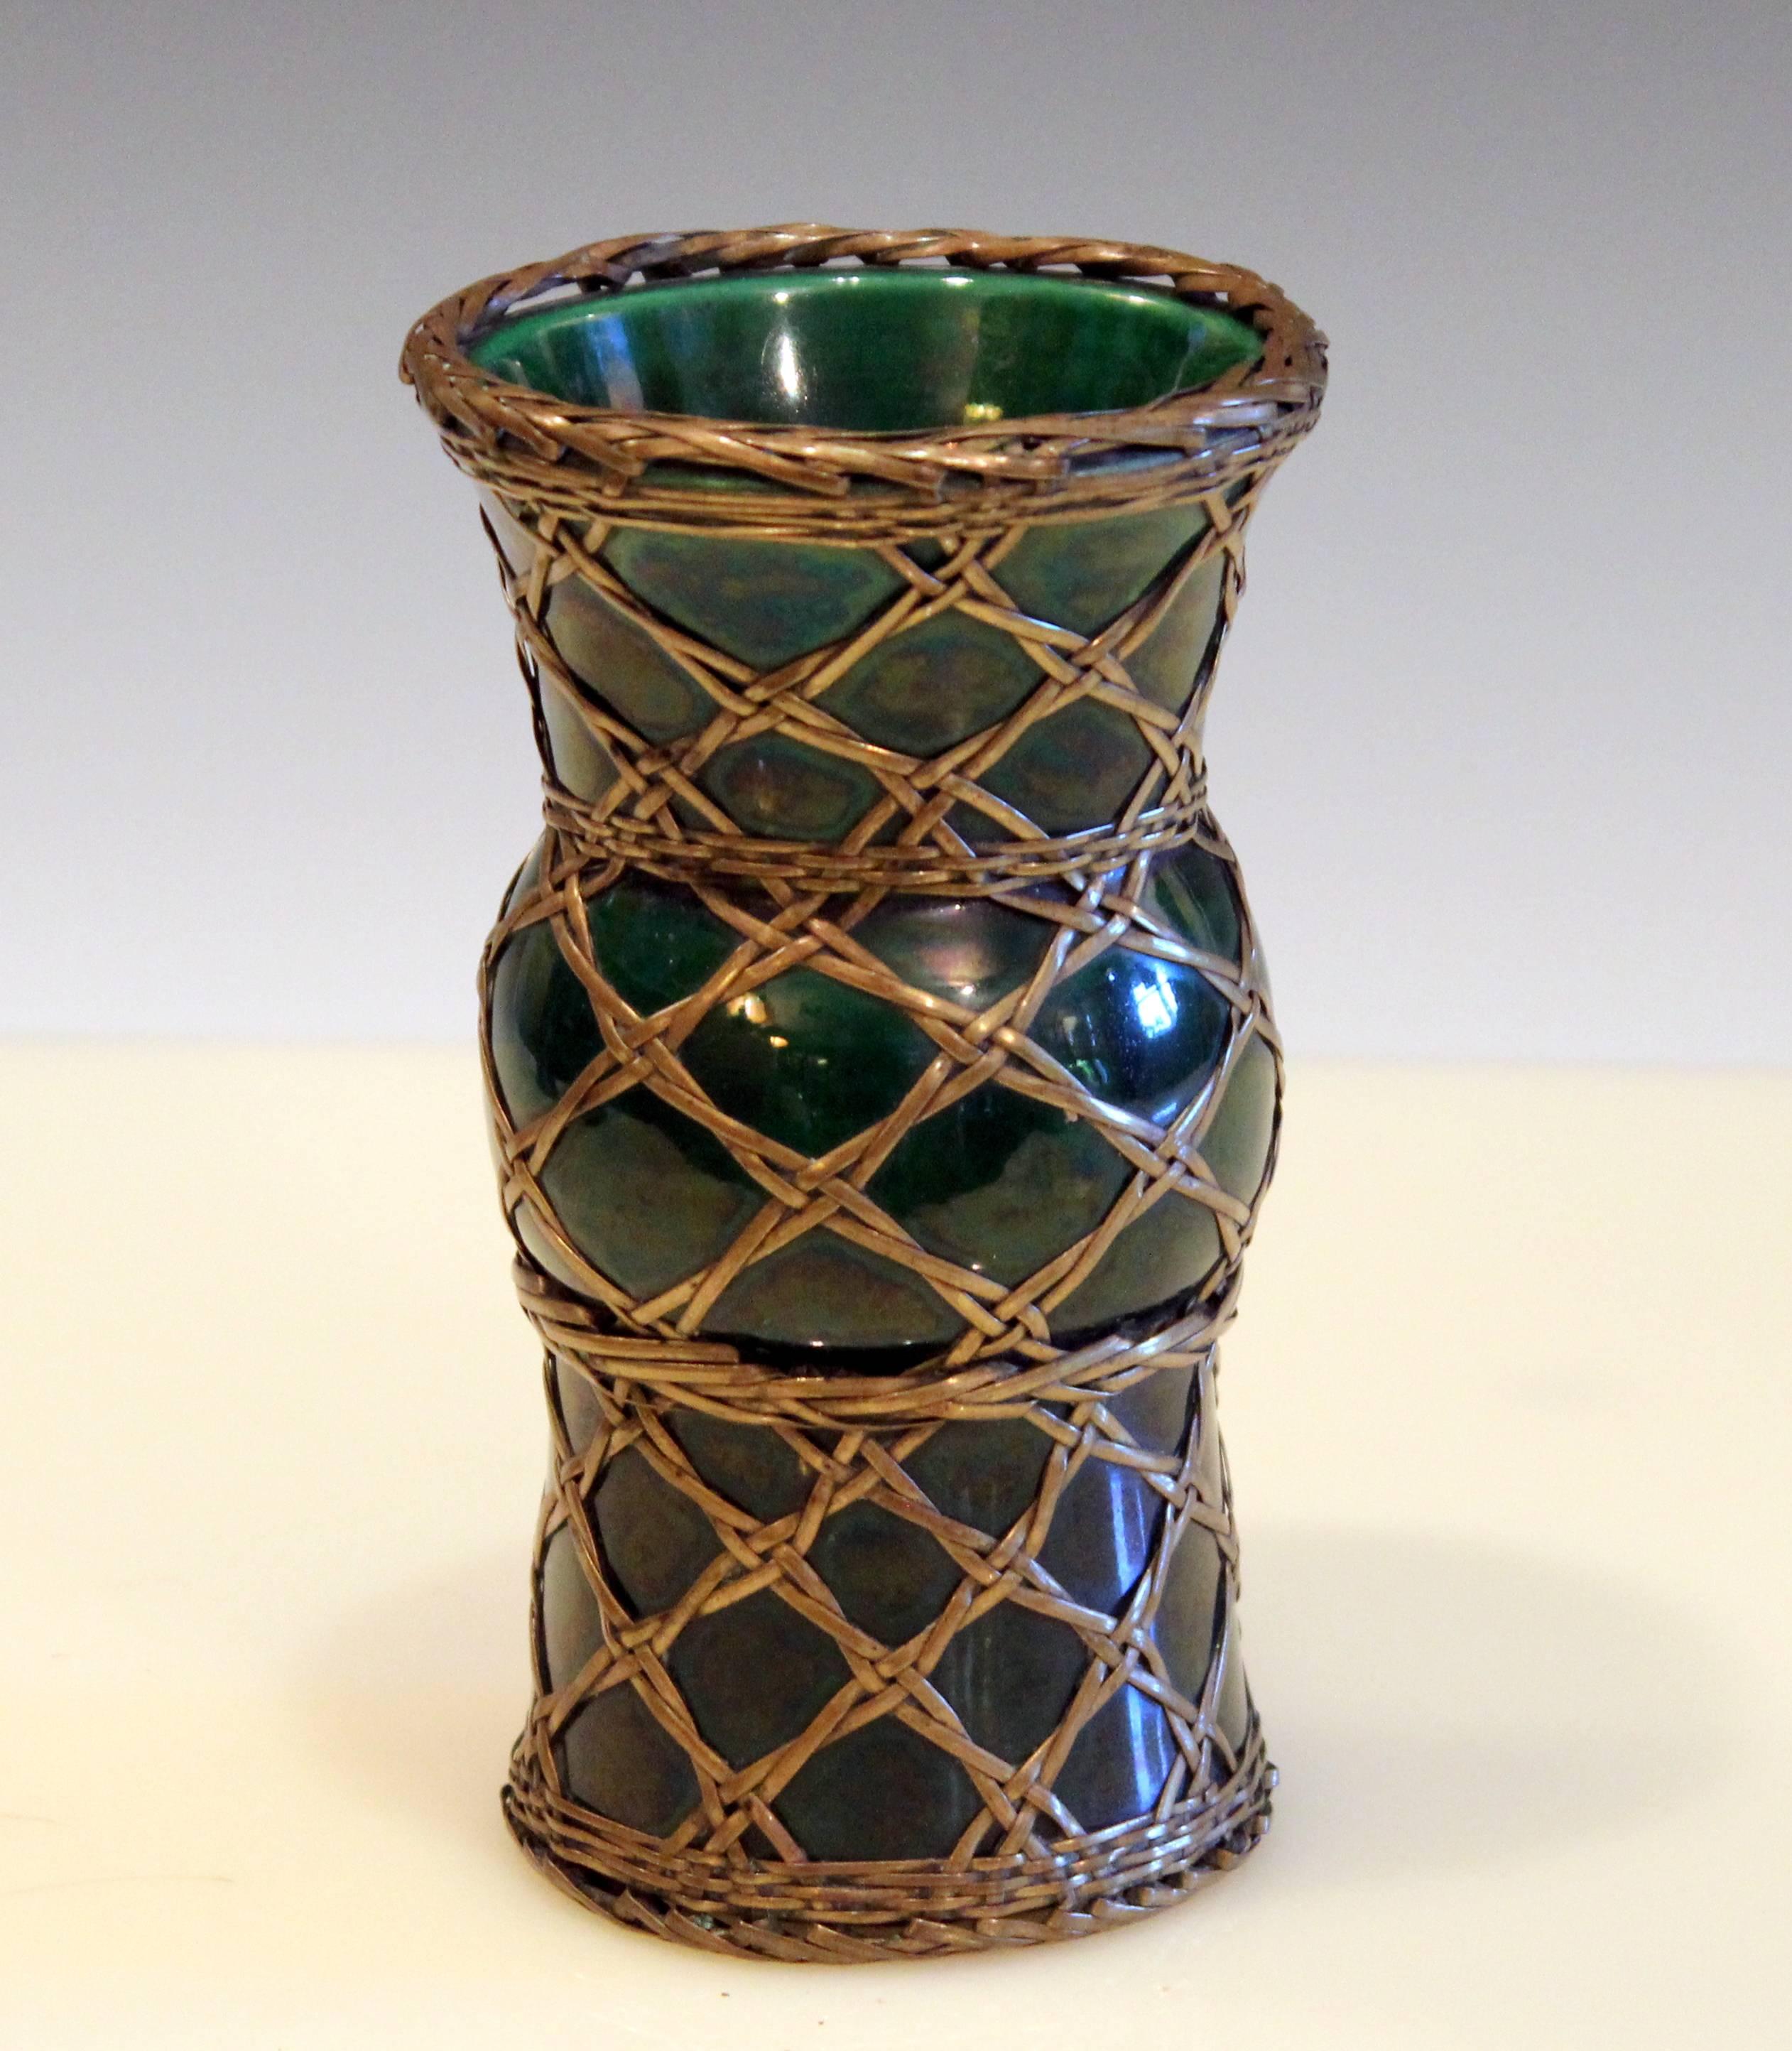 Antique Awaji pottery vase in Gu form with green glaze and brass over weaving, circa 1910. Measure: 6